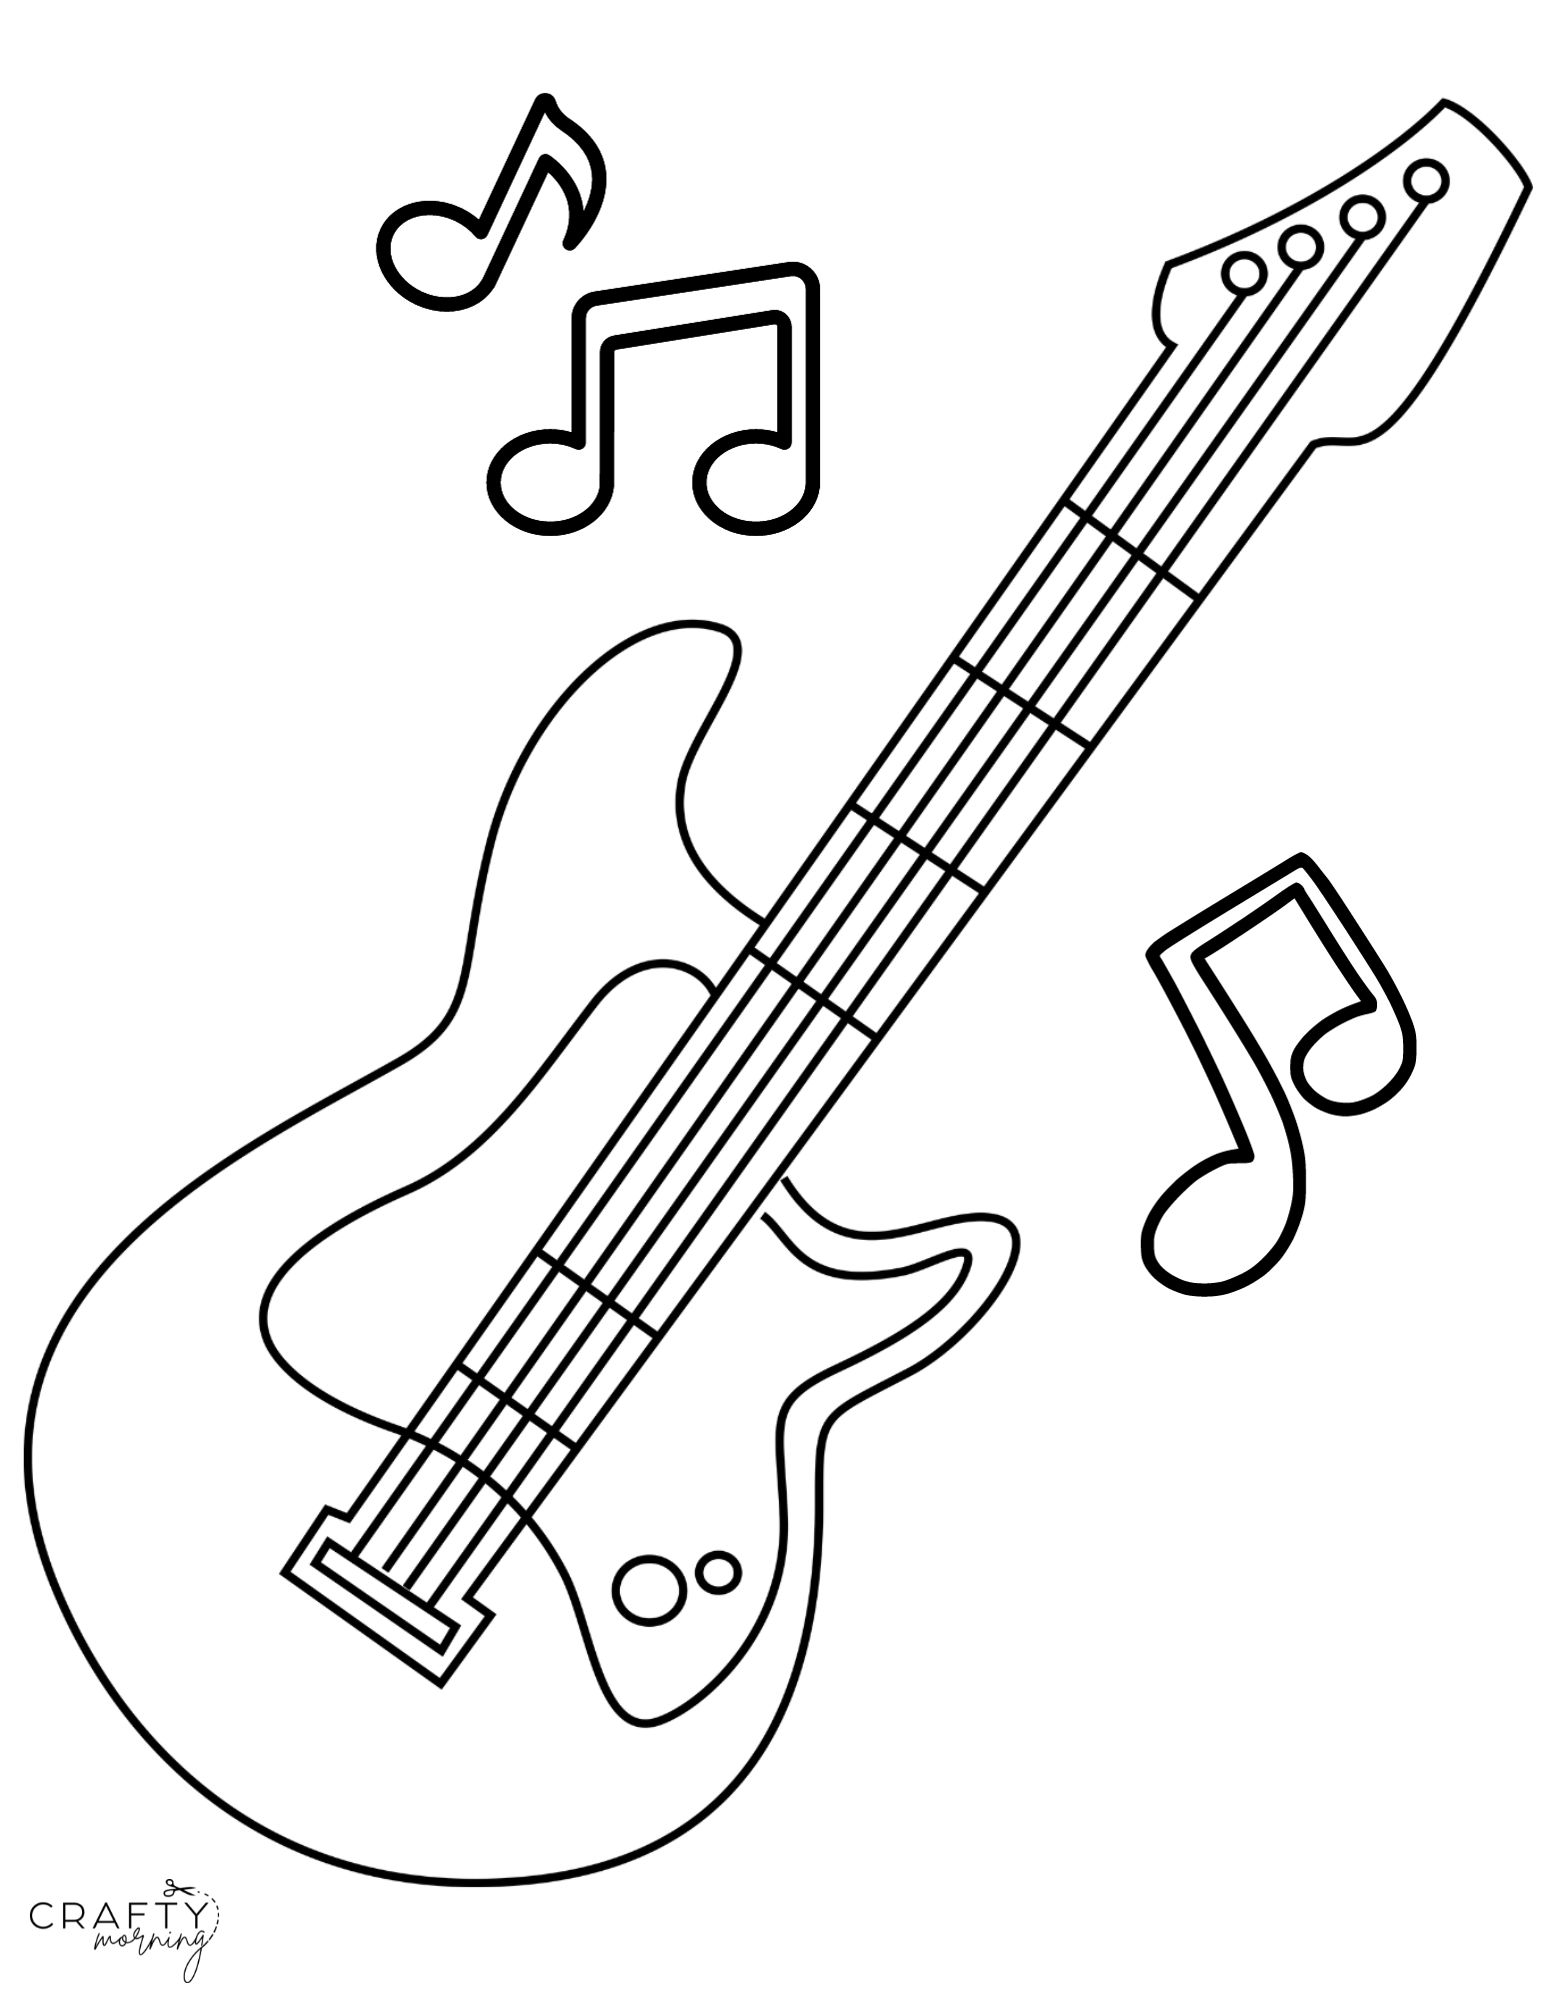 How to Draw a Bass Guitar: 8 Steps (with Pictures) - wikiHow Fun